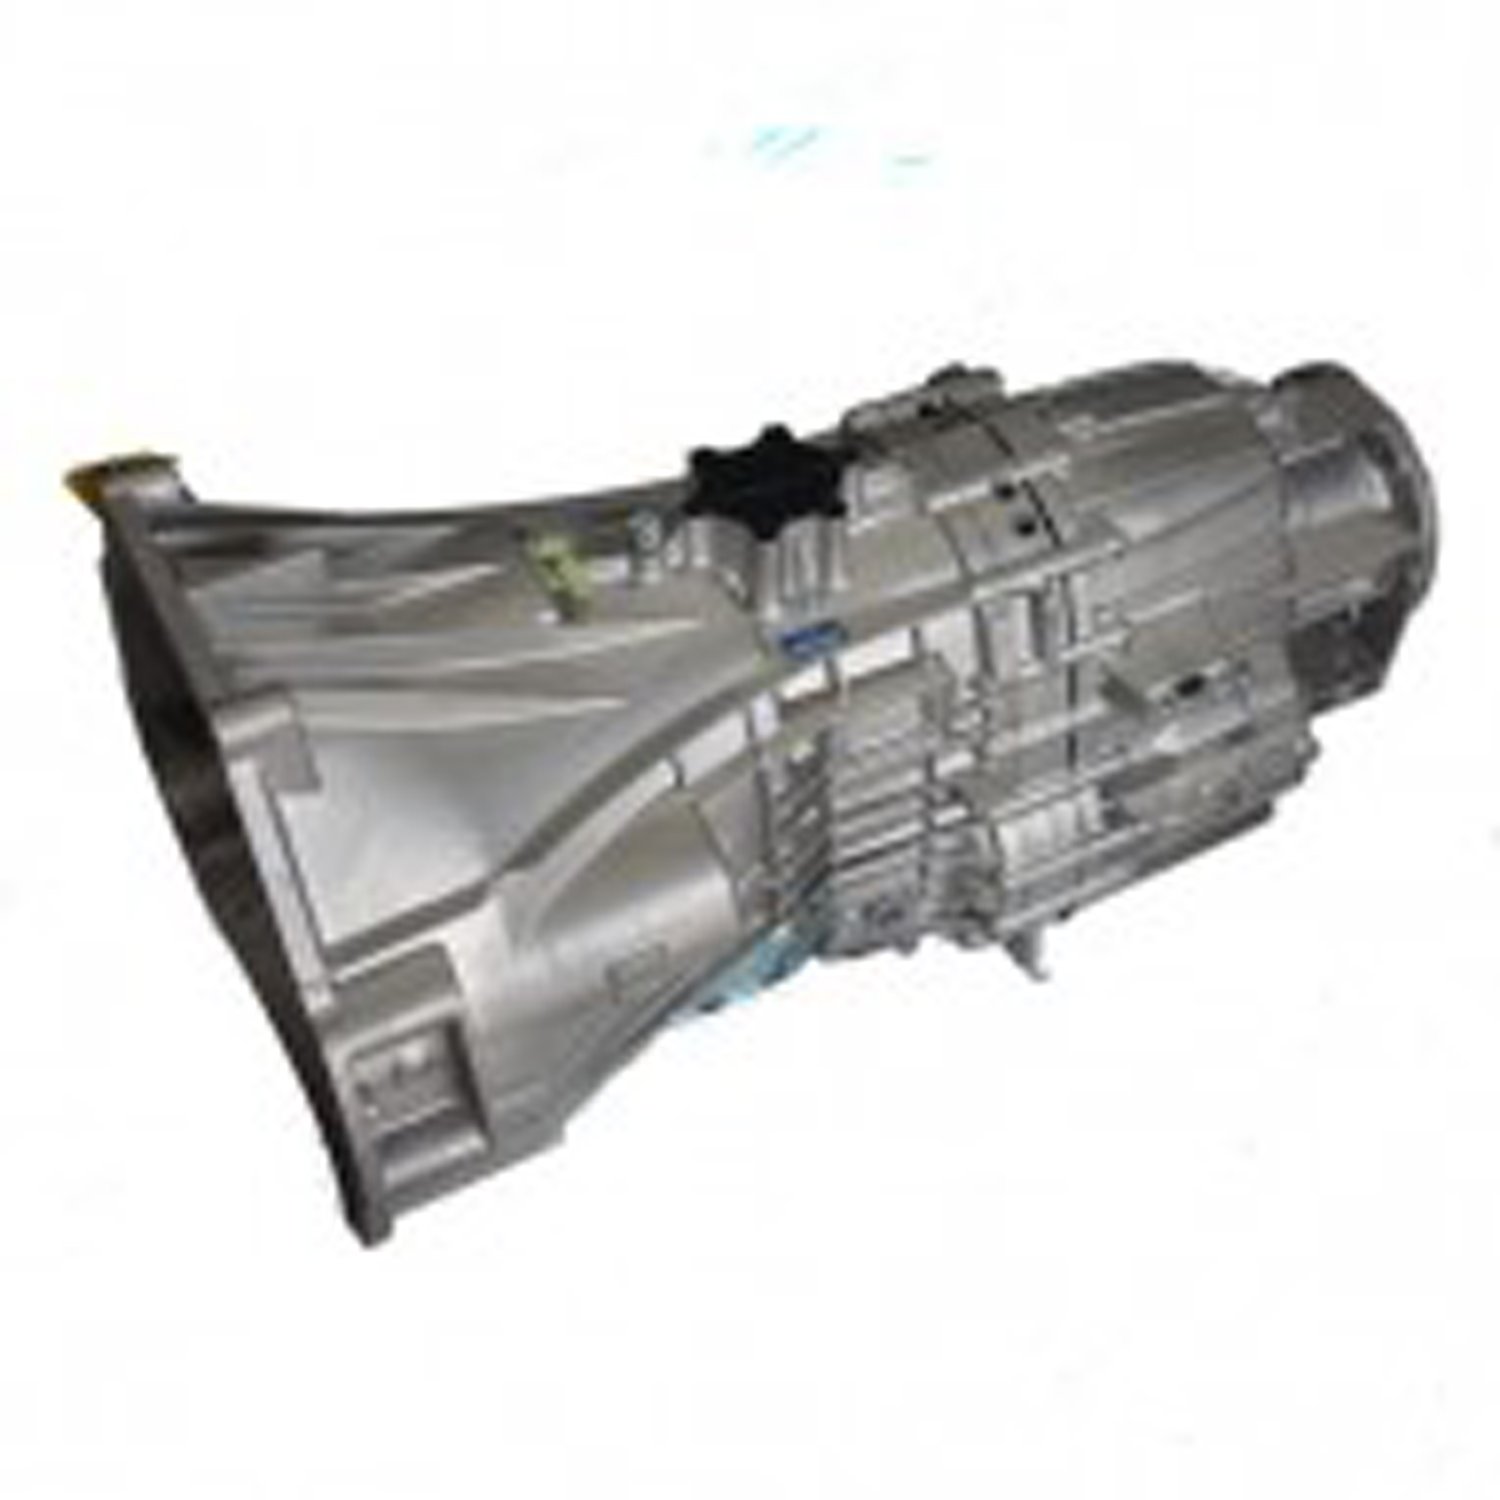 Remanufactured S6-S650F Manual Transmission for Ford 02-07 F-series 5.4L & 6.8L, 6 Speed